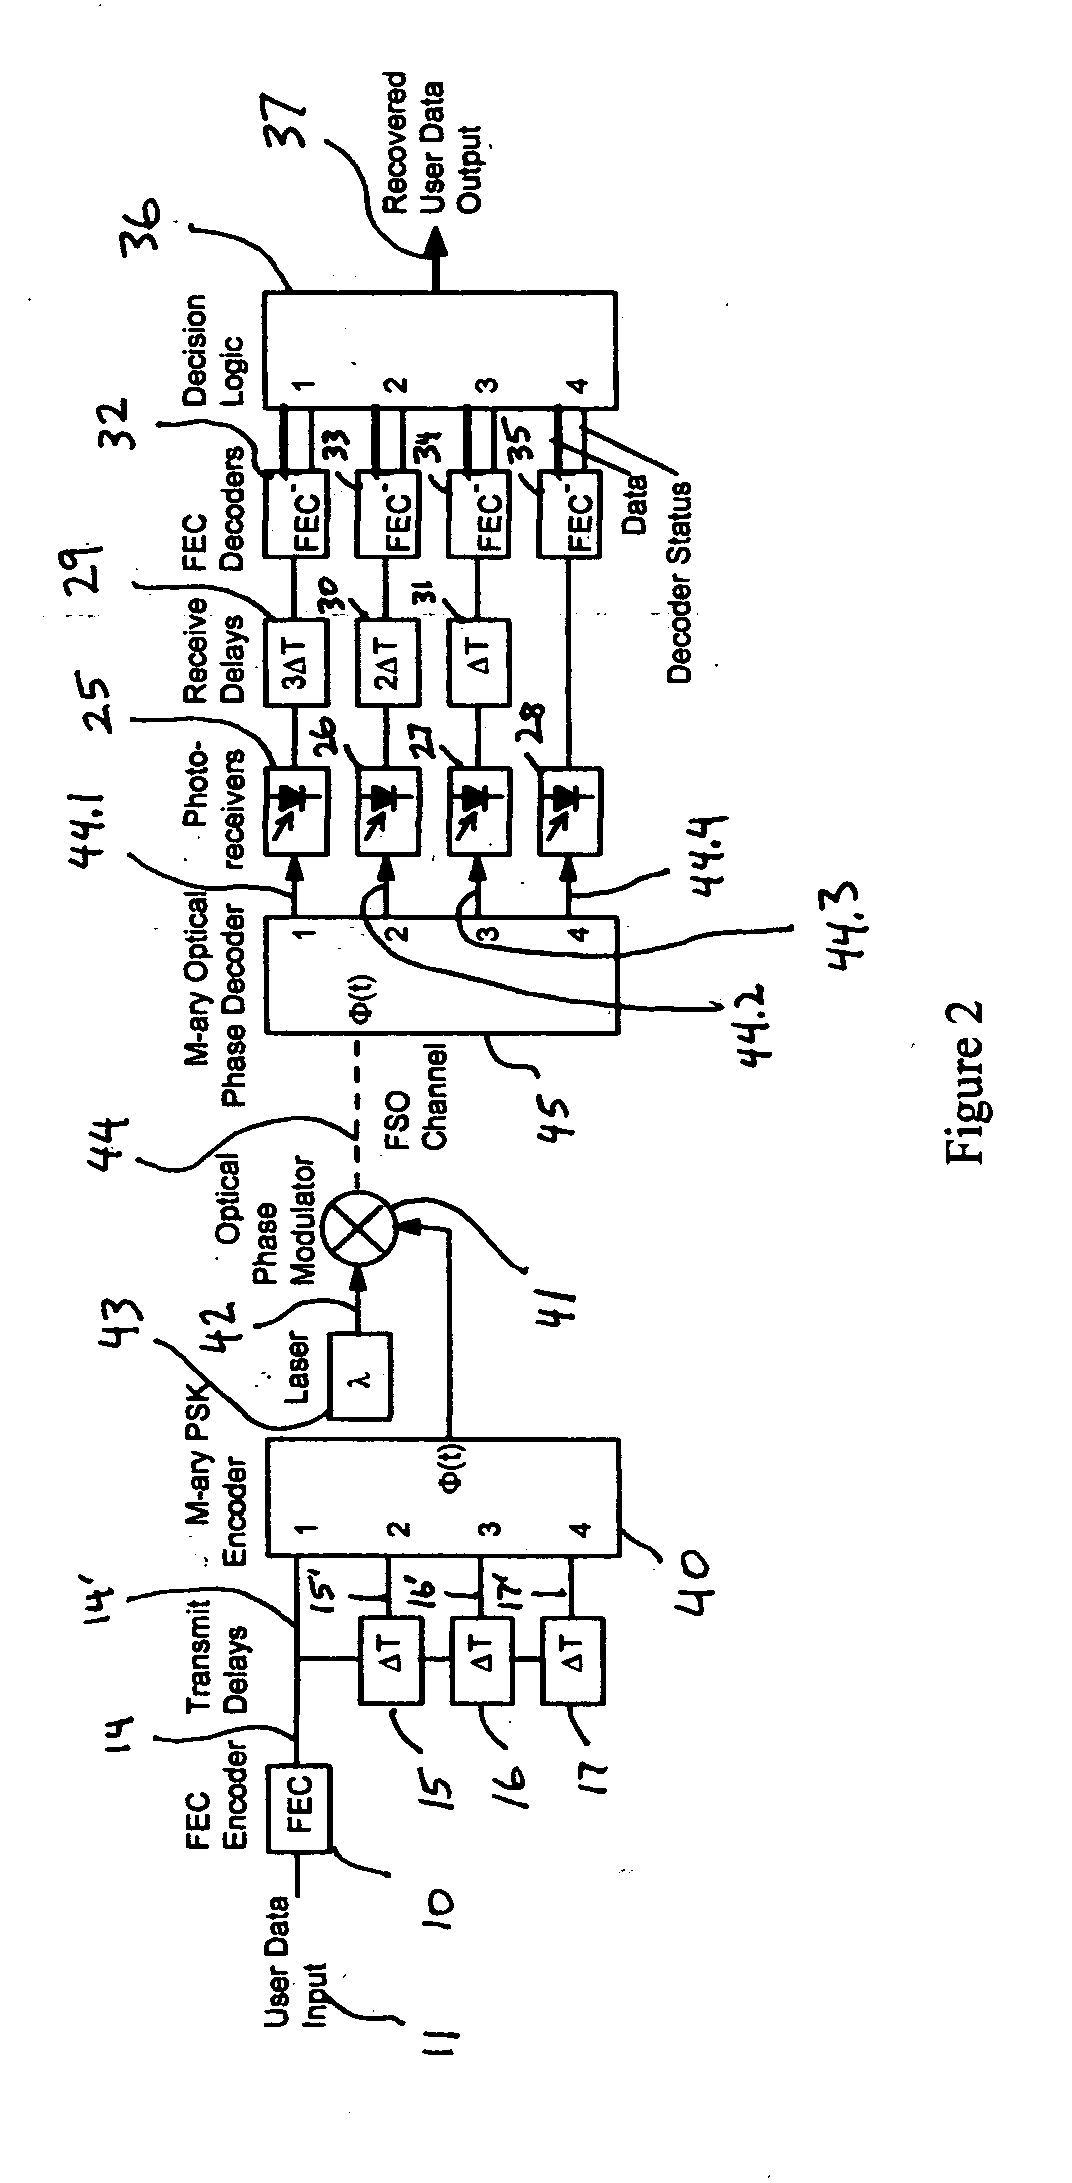 Fade-resistant forward error correction method for free-space optical communications systems